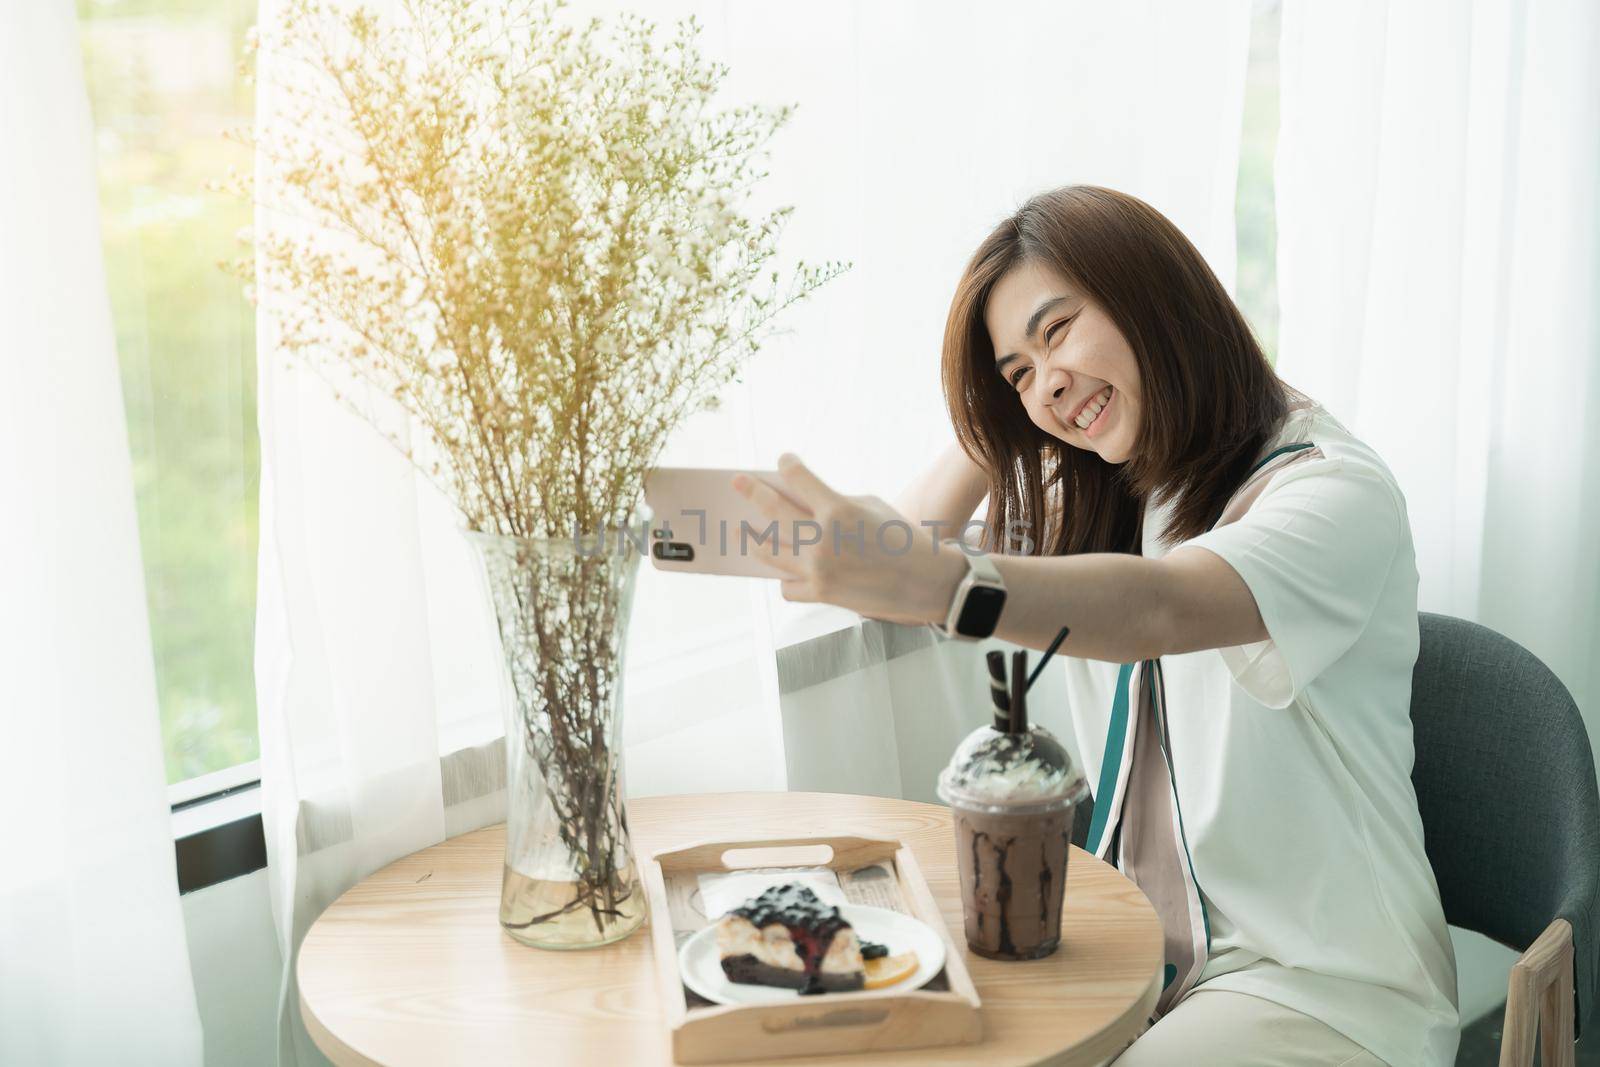 beautiful girl smiling using mobile phone selfie in the cafe, girl eat coffee and cake